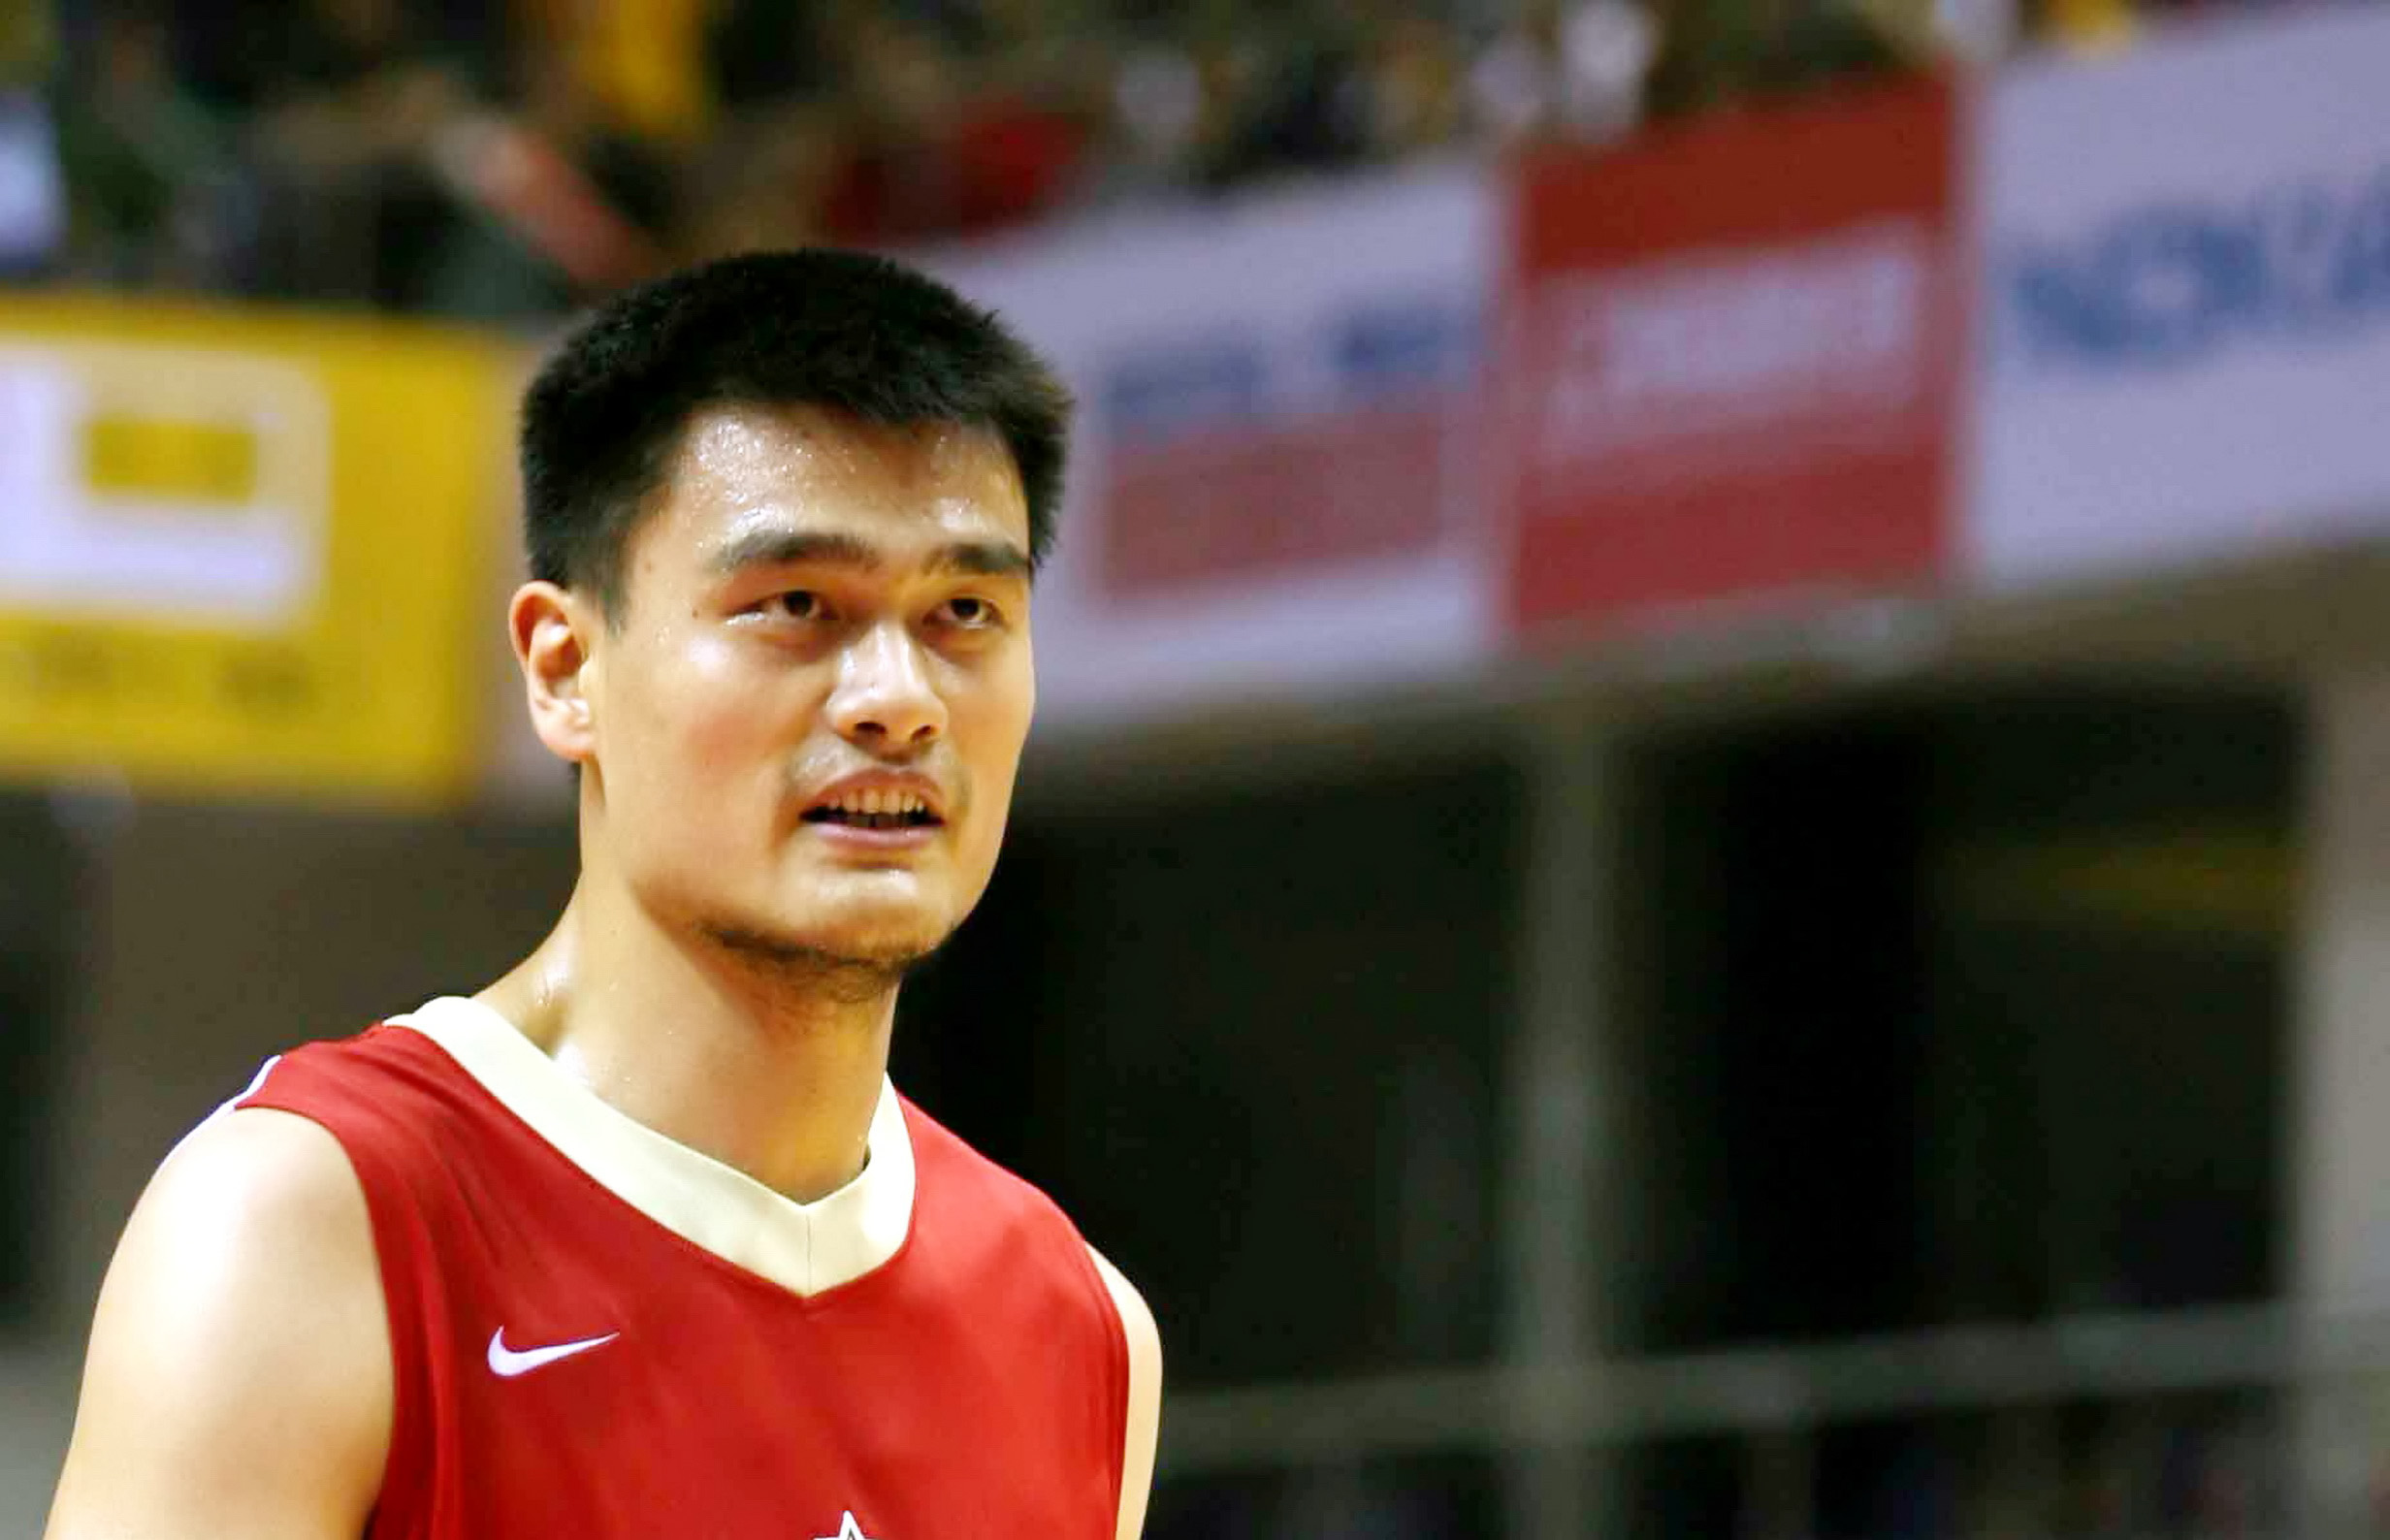 Report: Yao Ming to be enshrined in Basketball Hall of Fame - NBC Sports